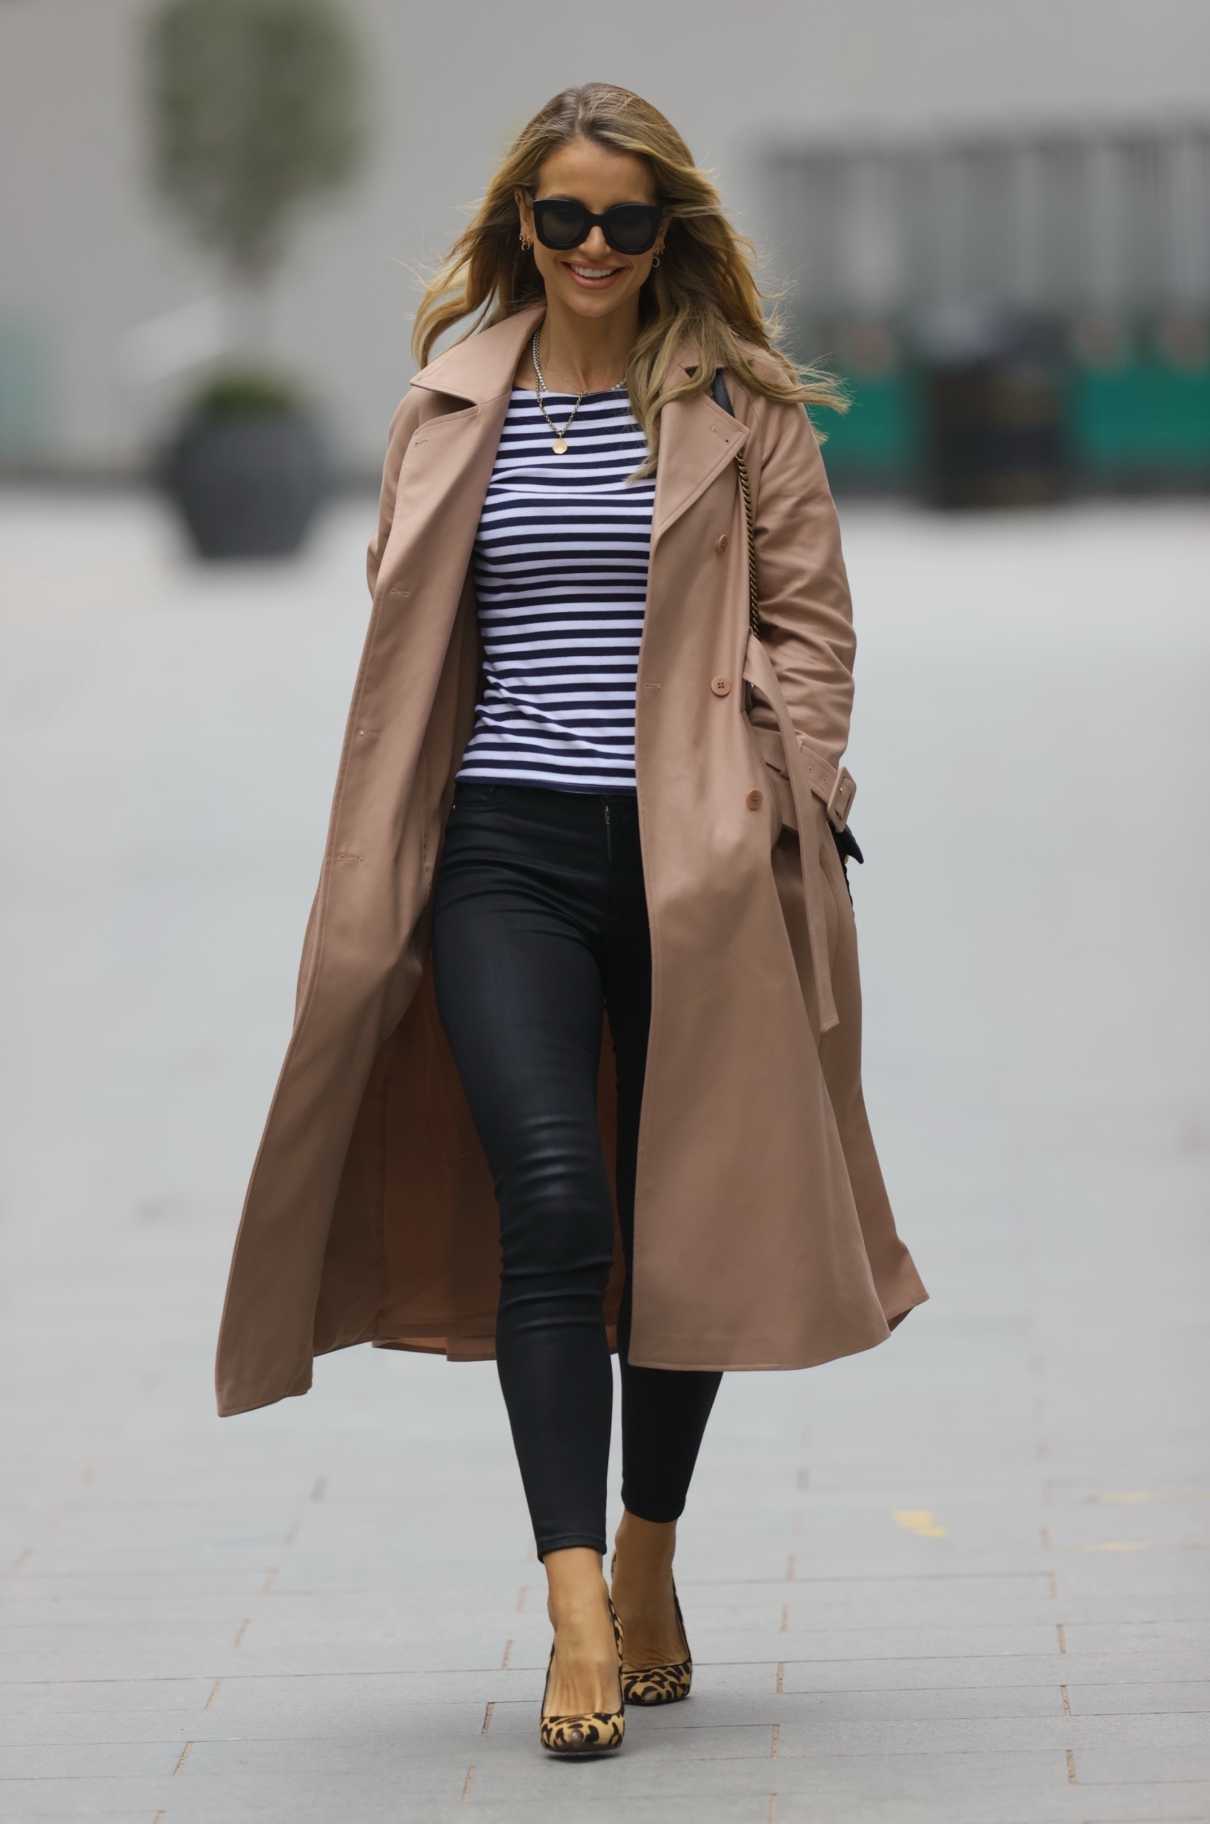 Vogue Williams in a Beige Trench Coat Arrives at the Heart Radio ...